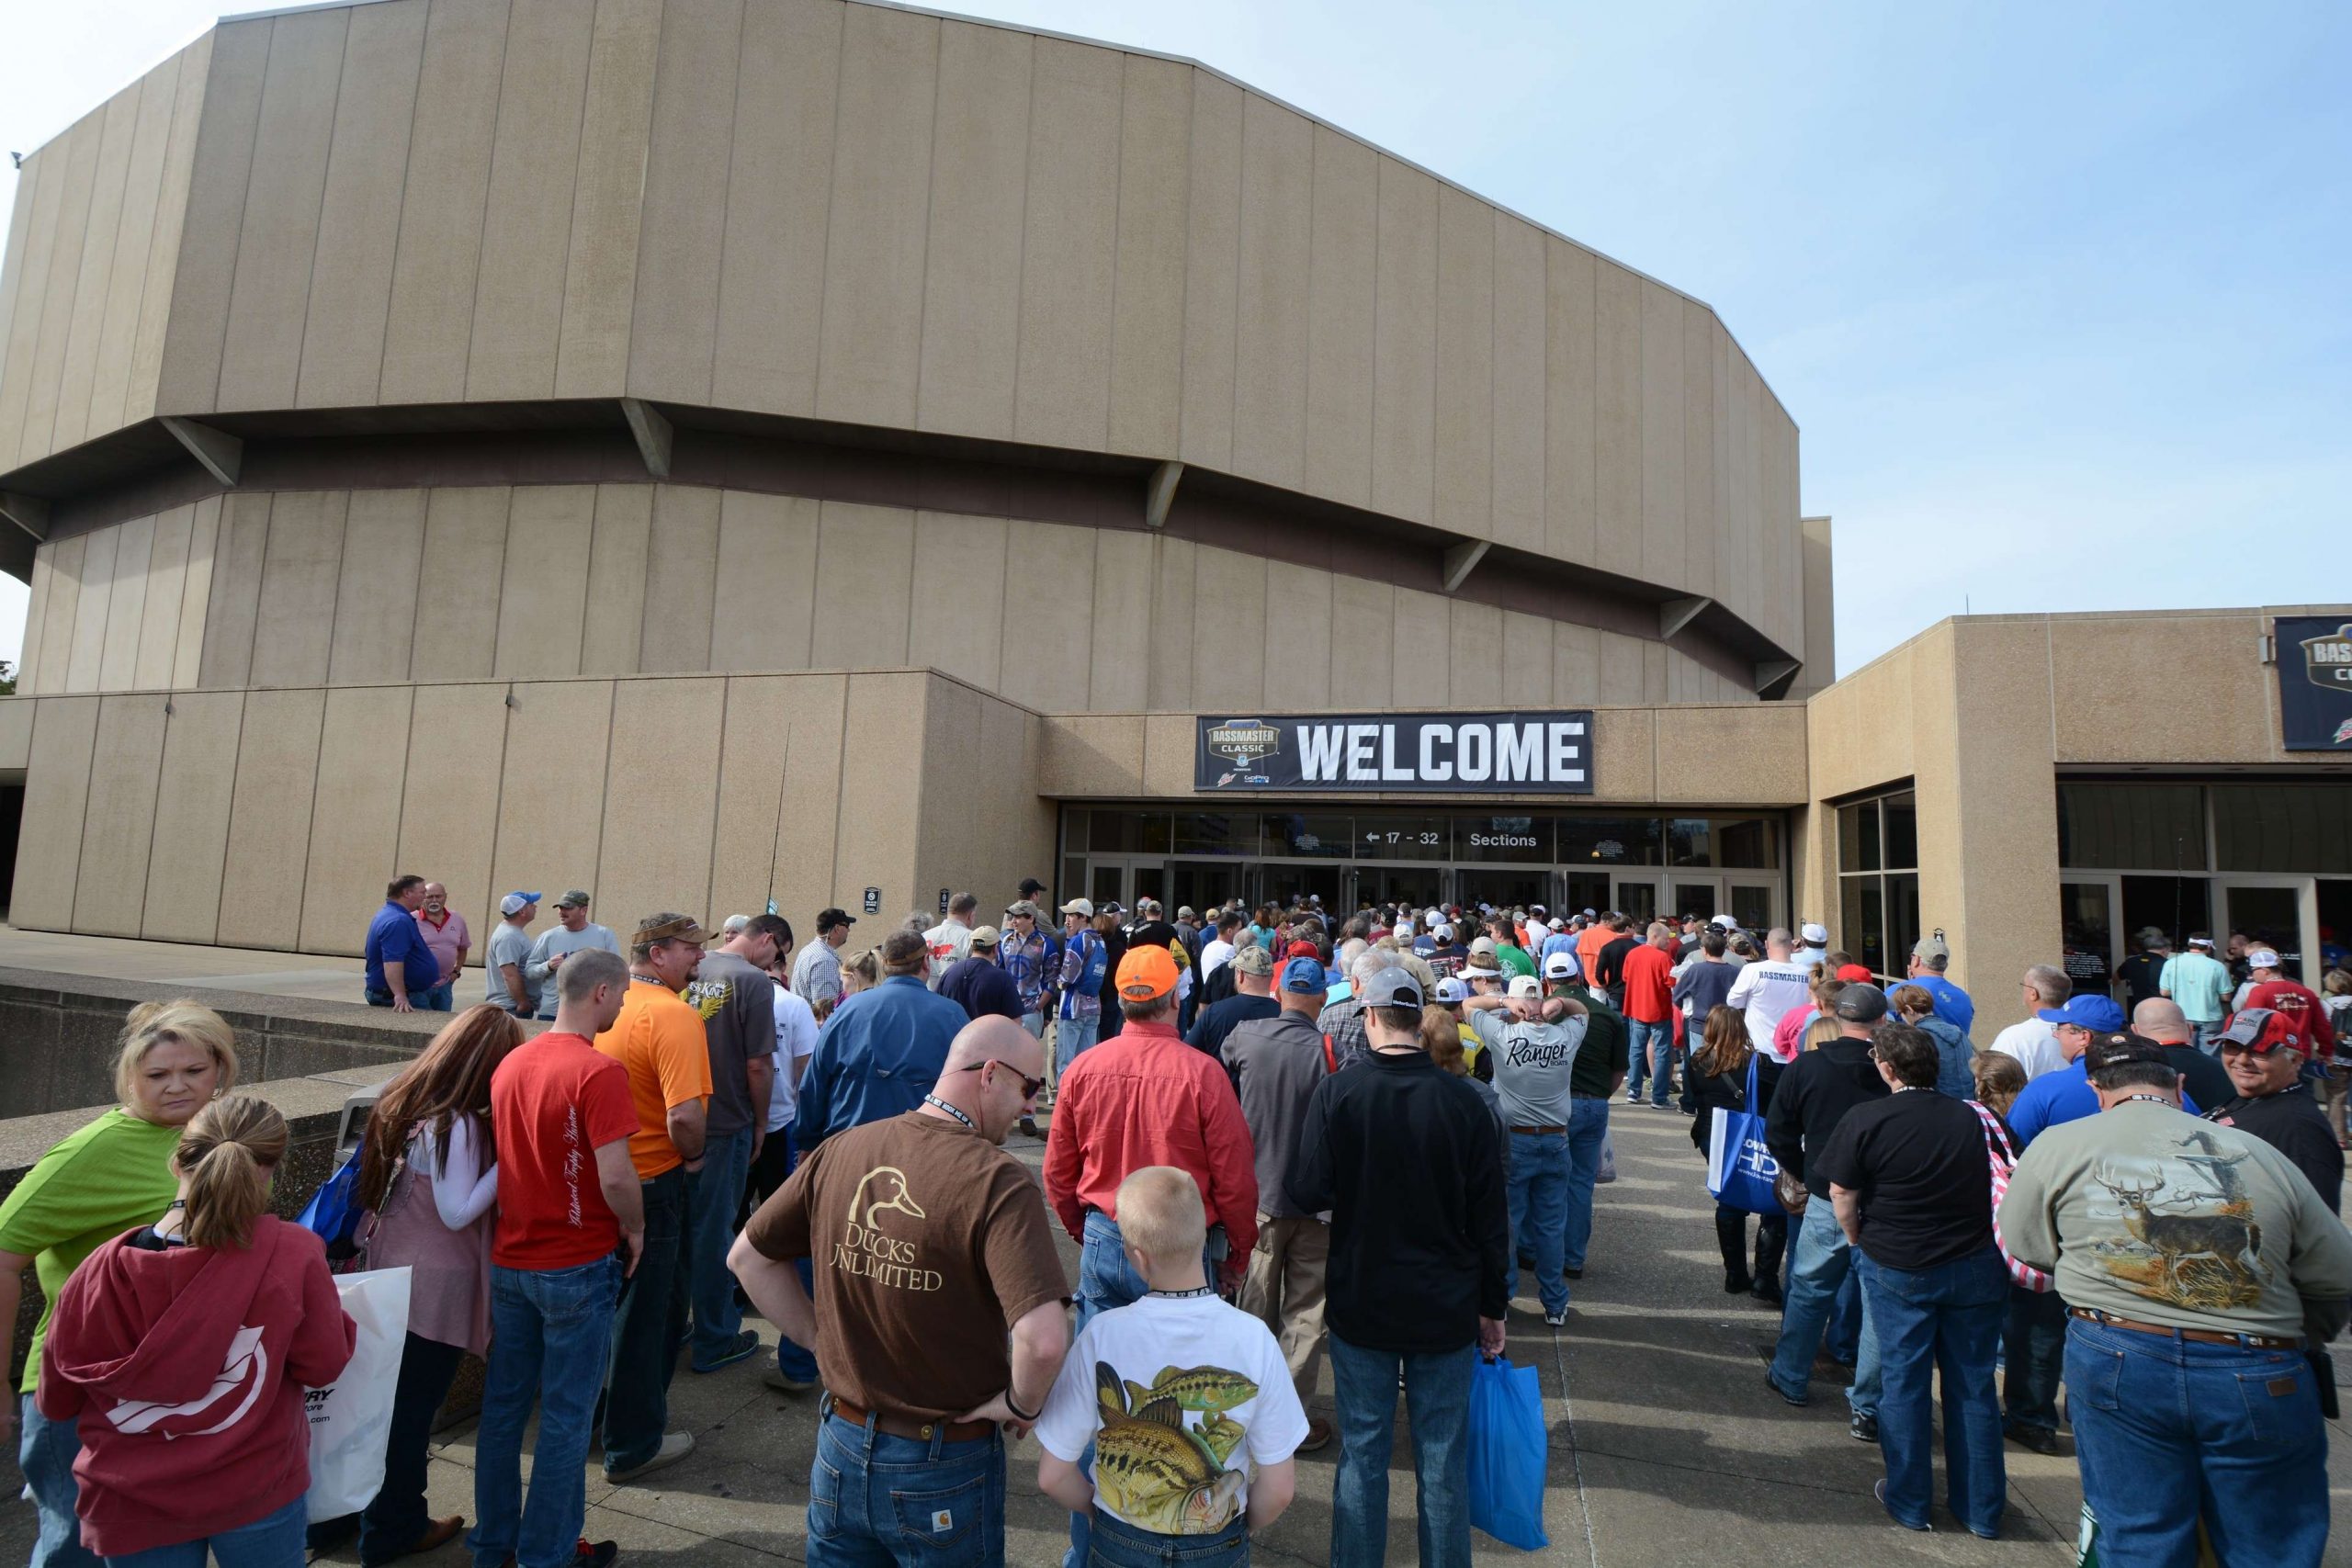 Attend the 2020 Academy Sports + Outdoors Bassmaster Classic